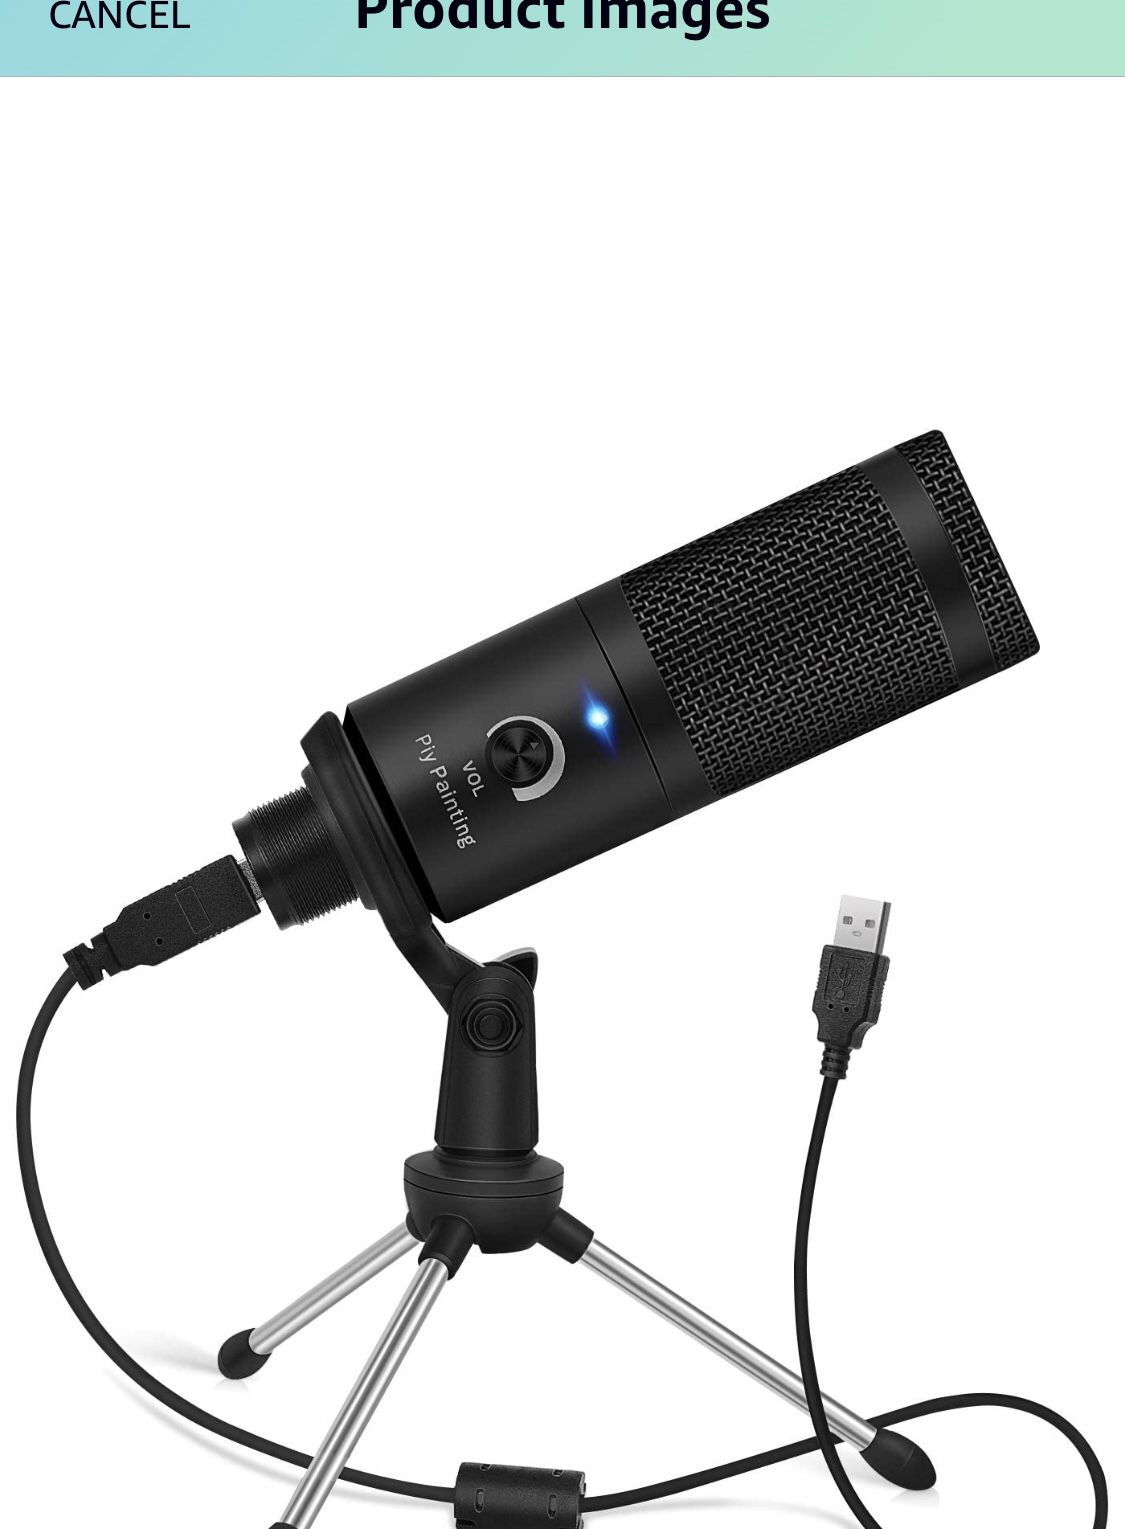 USB Microphone, Piy Painting Cardioid Recording Microphone, 192kHz/24bit Condenser Mic Compatible with PC Laptop Mac Windows, Plug&Play Computer Micro